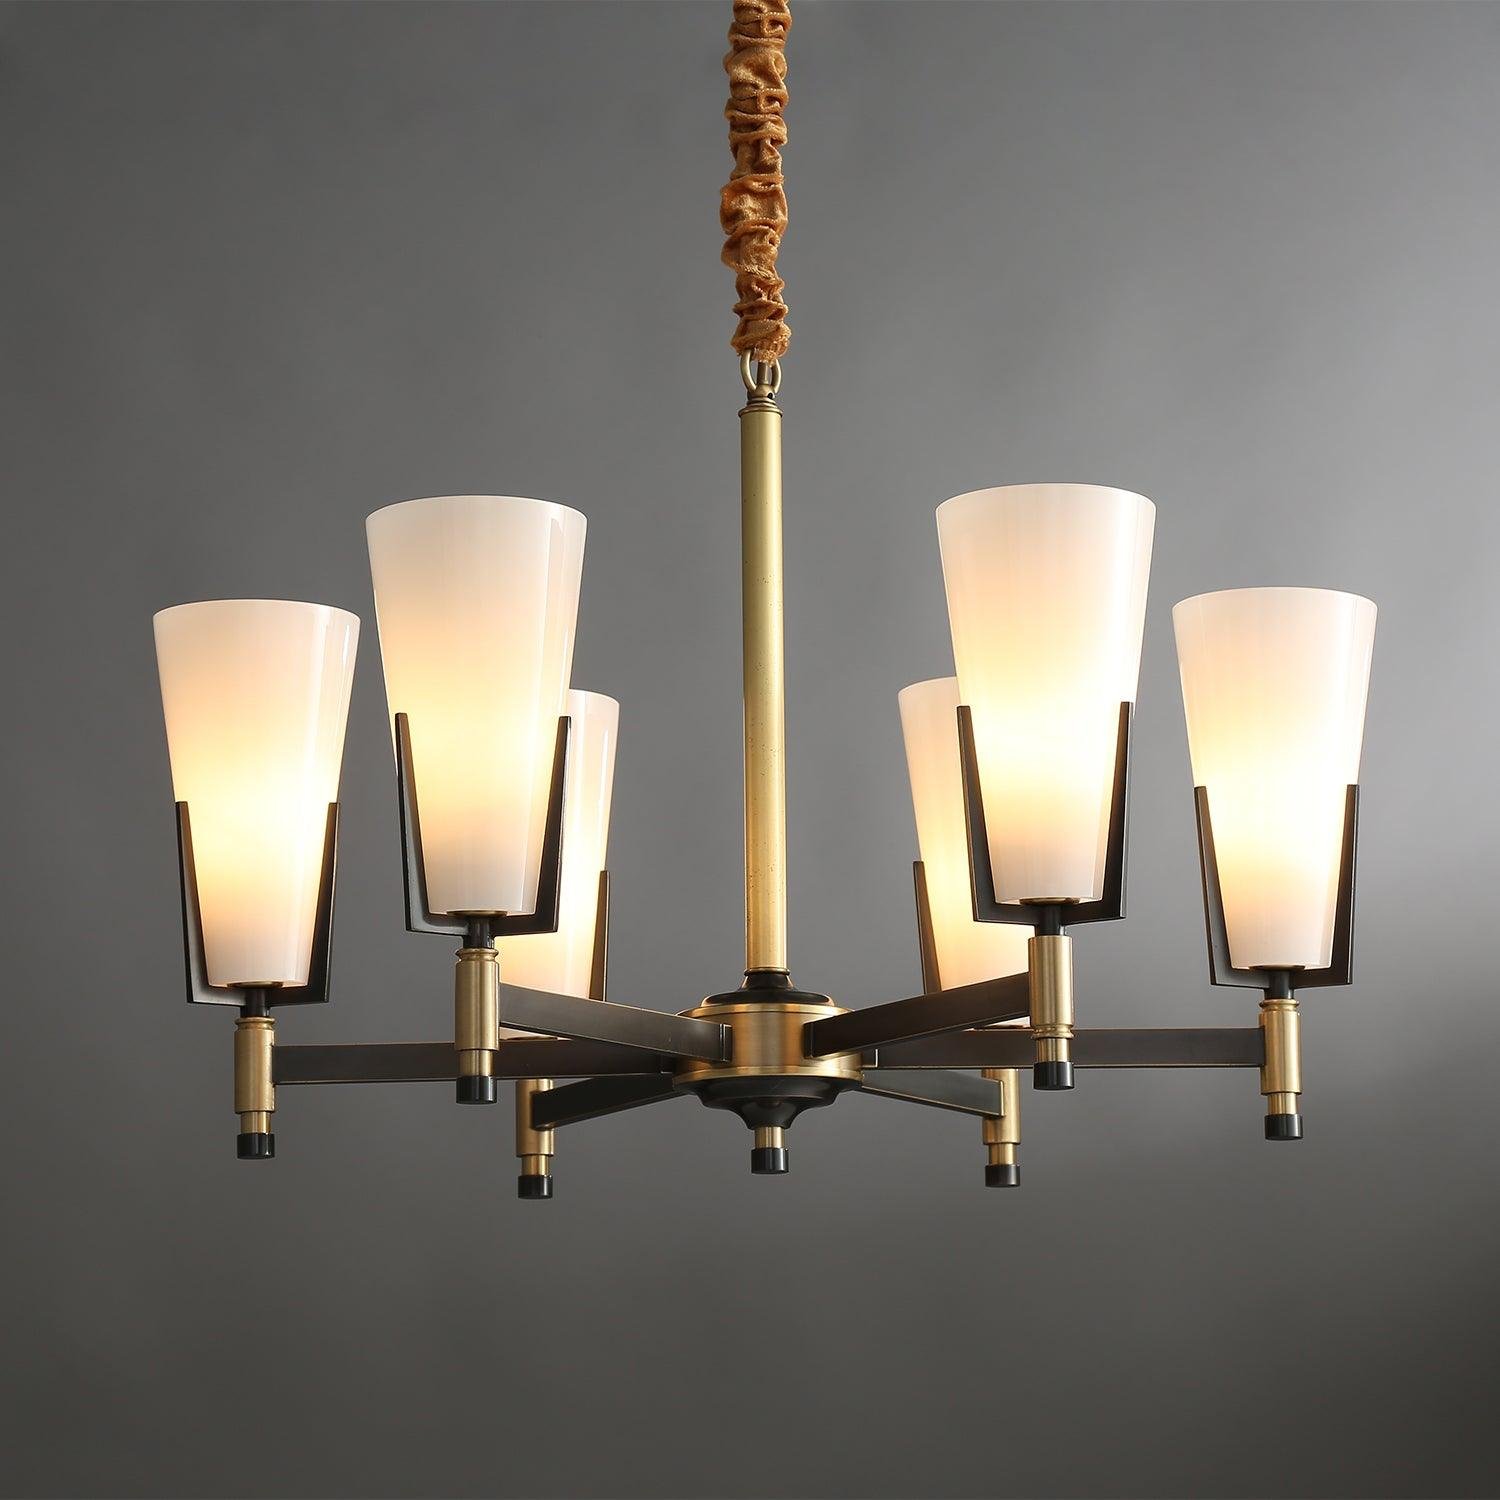 Black and White Upton Chandelier with 6 Heads, measuring 25.6 inches in diameter and standing 18.1 inches tall (or 65cm x 46cm).